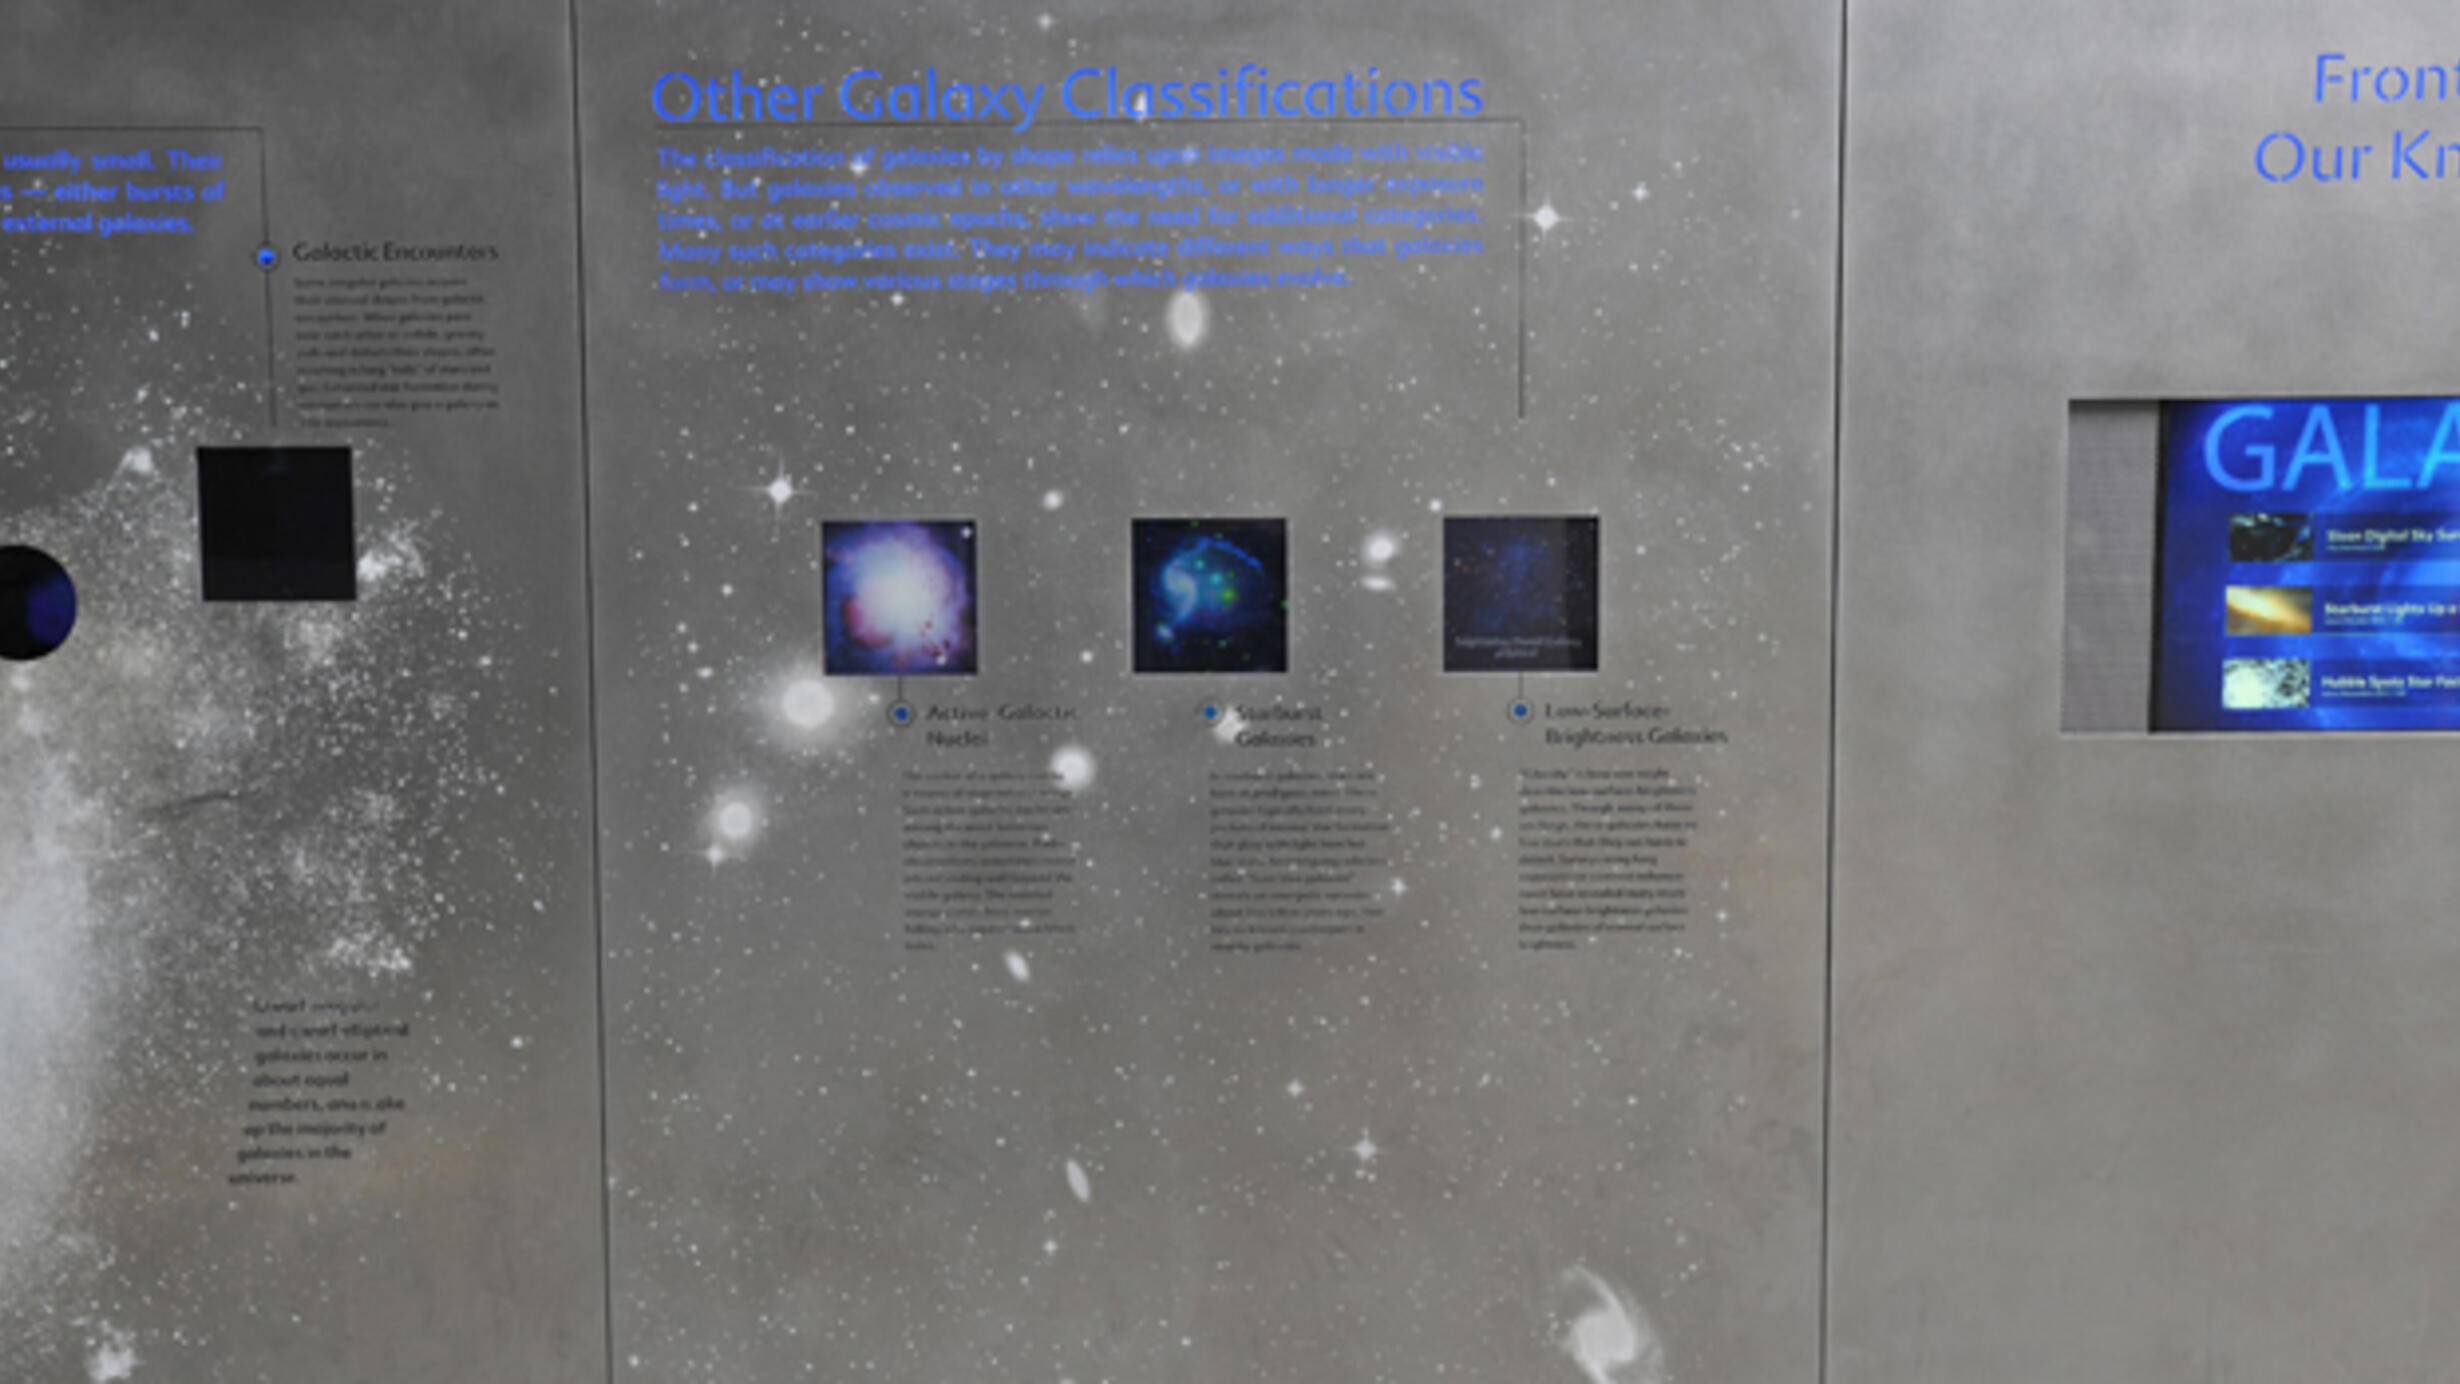 Other galaxy classifications_HERO